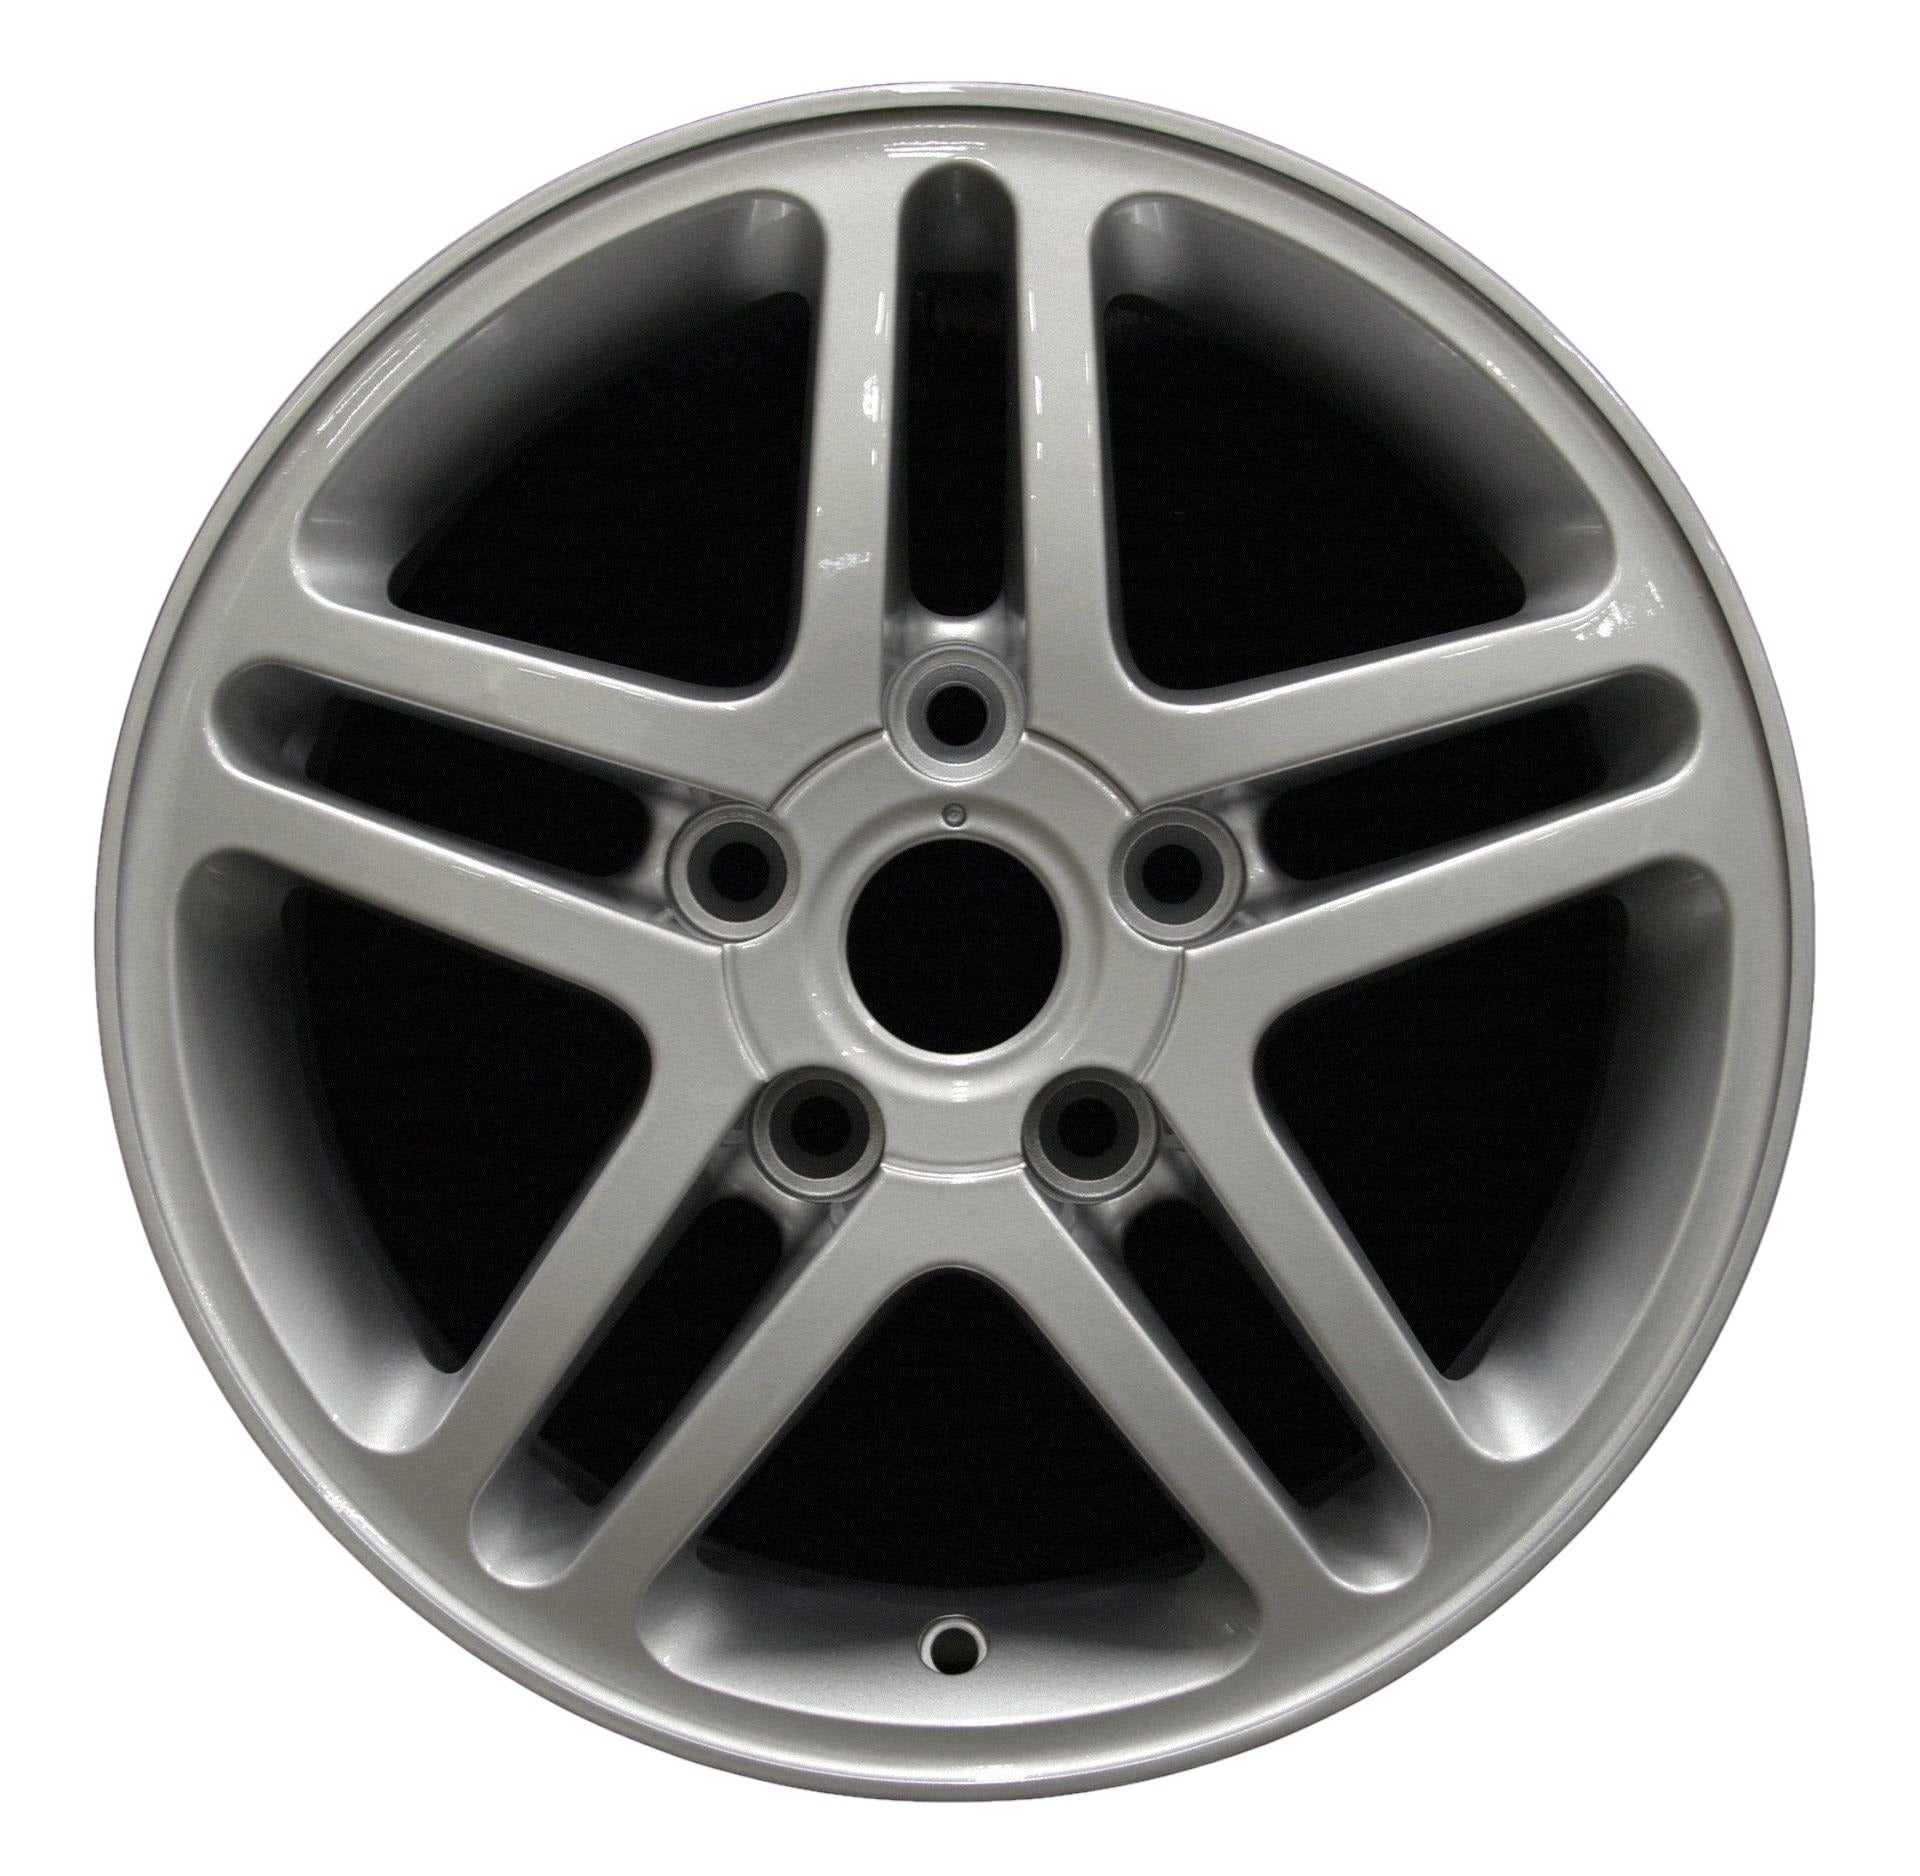 Toyota Camry  1997, 1998, 1999, 2000 Factory OEM Car Wheel Size 15x6 Alloy WAO.69455A.LS01.FF